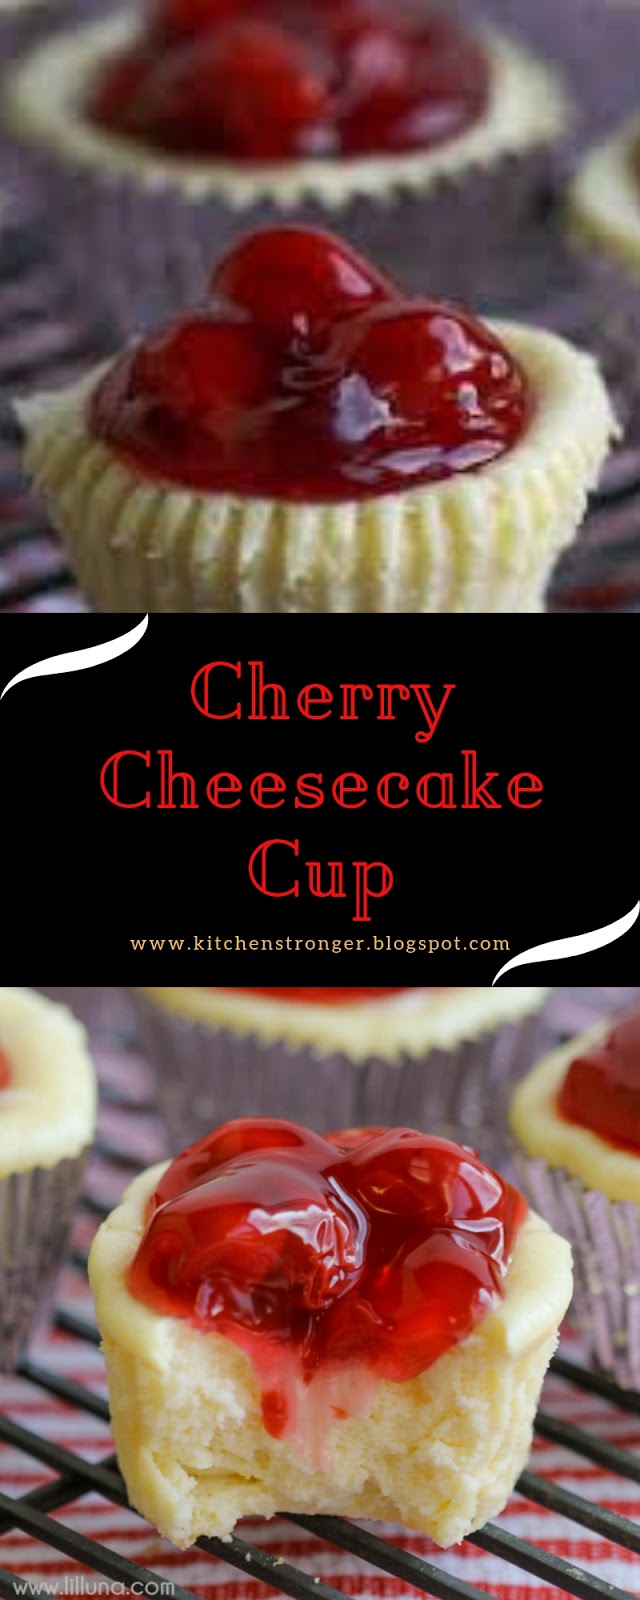 Cherry Cheesecake Cup